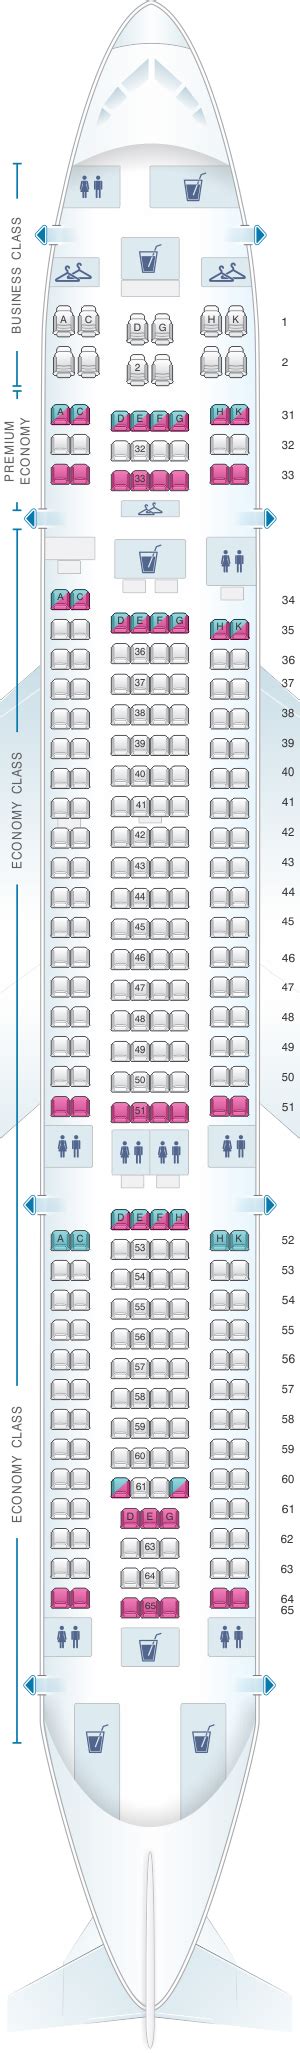 China Southern Airlines Seat Map Cabinets Matttroy